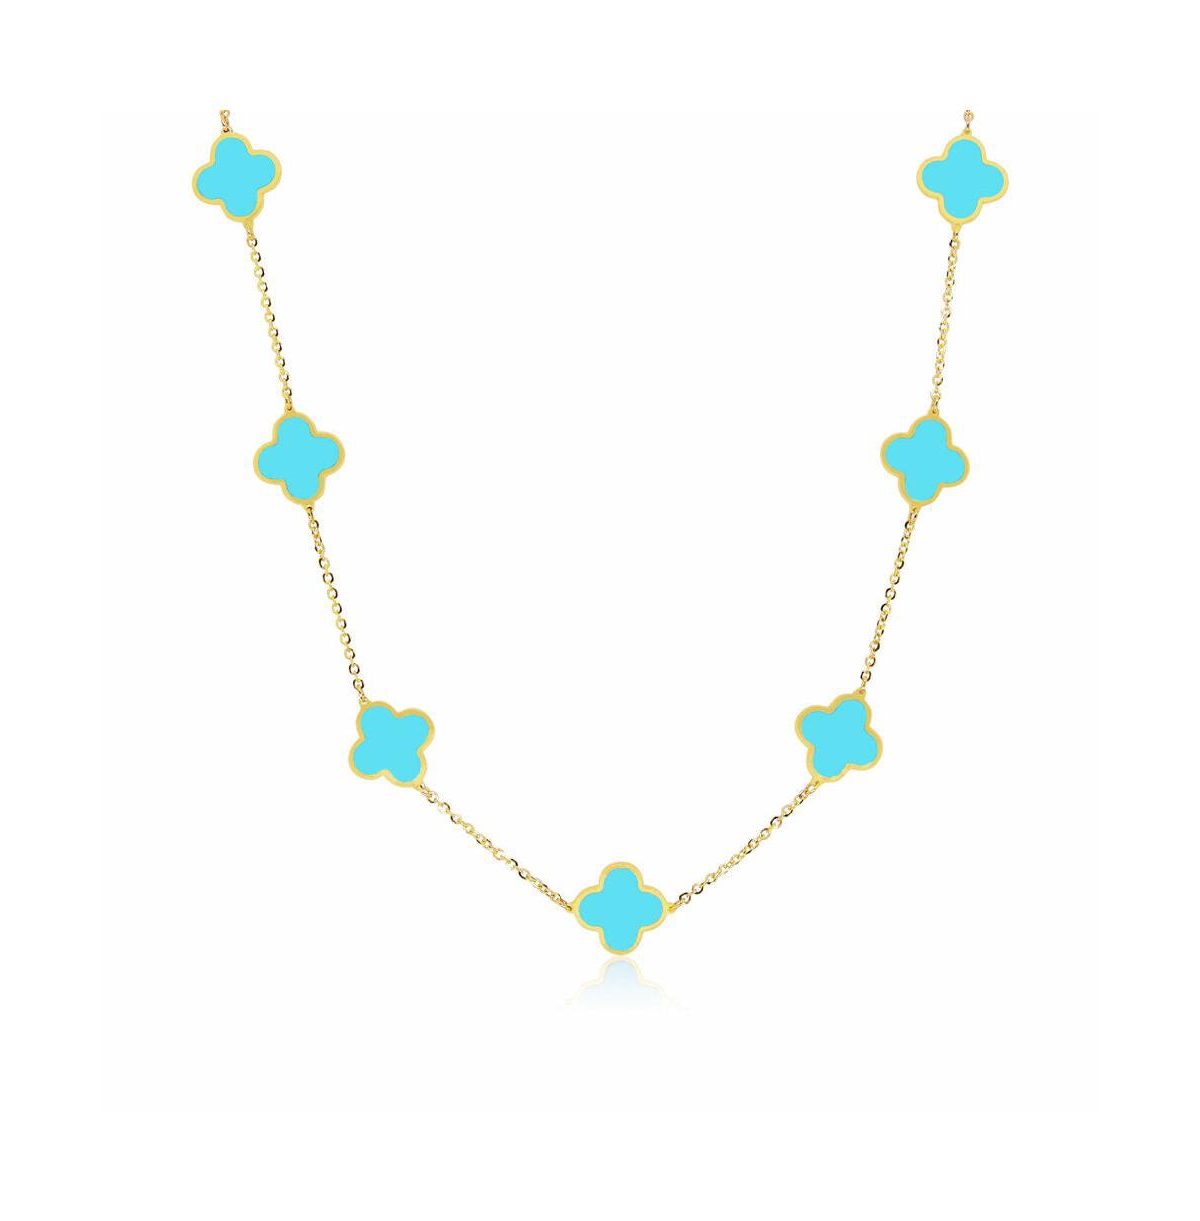 Small Turquoise Clover Necklace - Turquoise/aqua